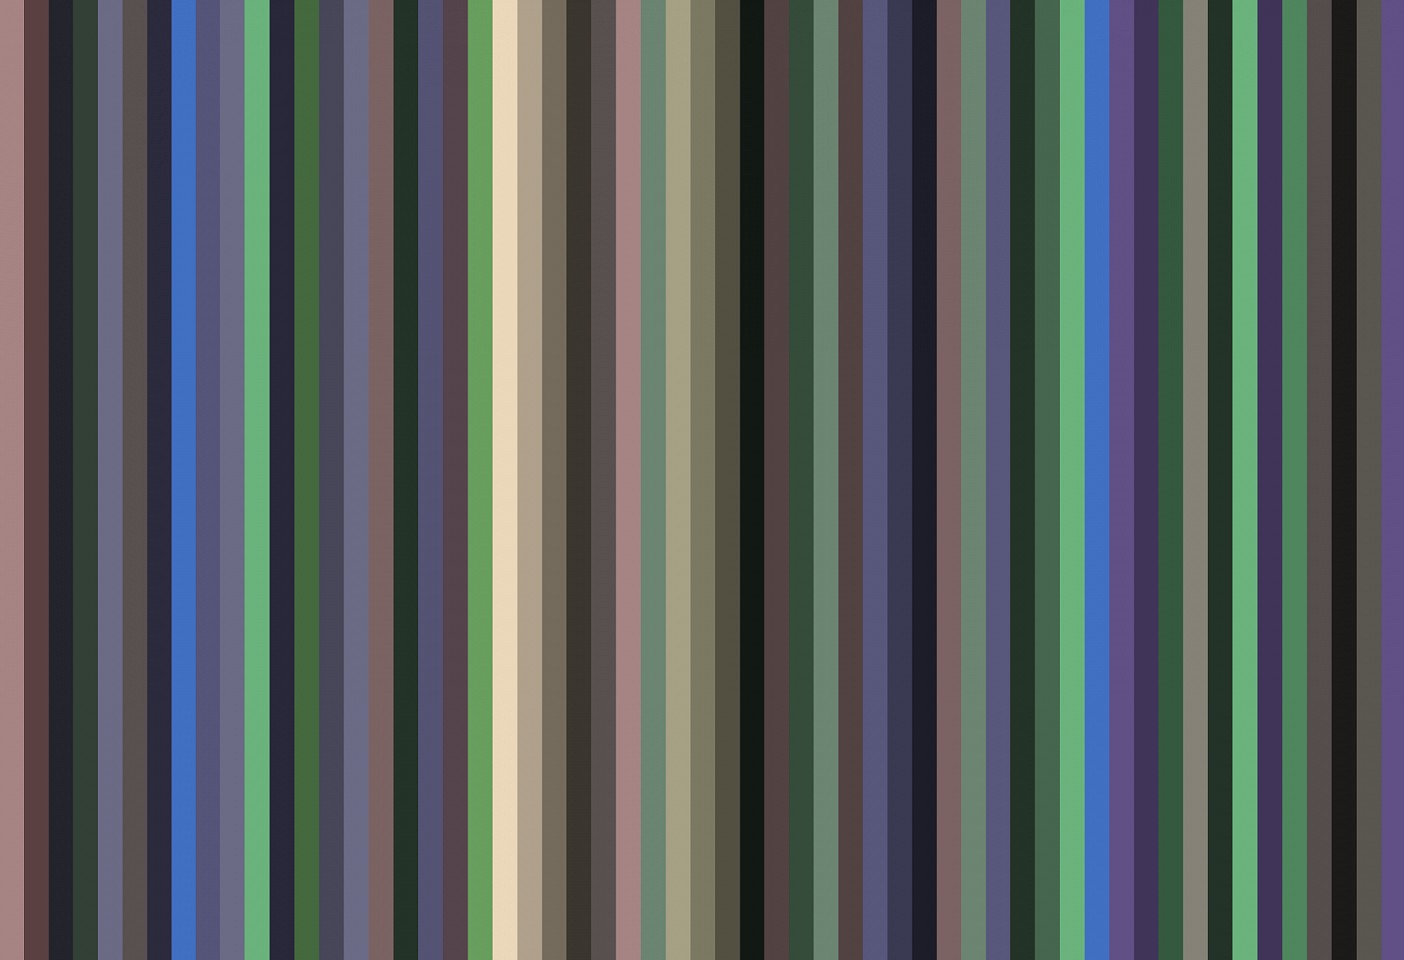 Dane Albert, Color Bars #21, 2024
Acrylic on canvas (Concept), 48 x 72 in. (121.9 x 182.9 cm)
Series of colored lines and shapes in multiple configurations
DA.2024.bars-021